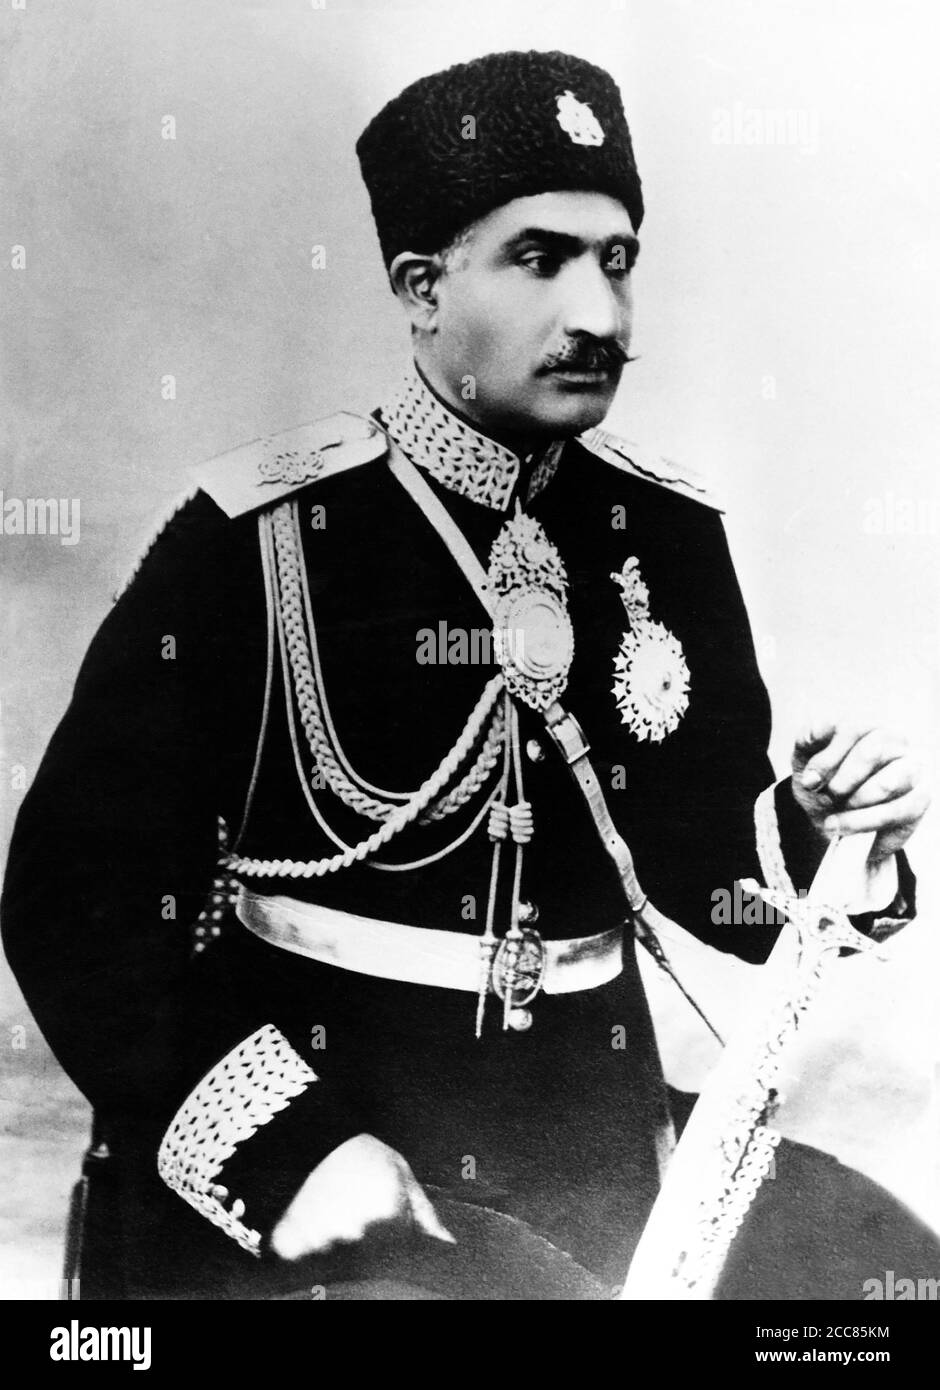 Iran: Reza Shah Pahlavi (1878-1944), during his time as Minister of War, c. 1921-1923. He was born in the village of Alasht in 1878 and joined the Persian Cossack Brigade when he turned sixteen, rising to become a Brigadier General, the only Iranian commander in its history. Under British direction, Reza helped orchestrate a coup in 1921 that overthrew the previous government, naming himself Minister of War and Sardar Sepah (Commander-in-Chief of the Army). He became Prime Minister in 1923, and later was appointed as Shah and Iran's legal monarch in 1925, founding the Pahlavi Dynasty. Stock Photo